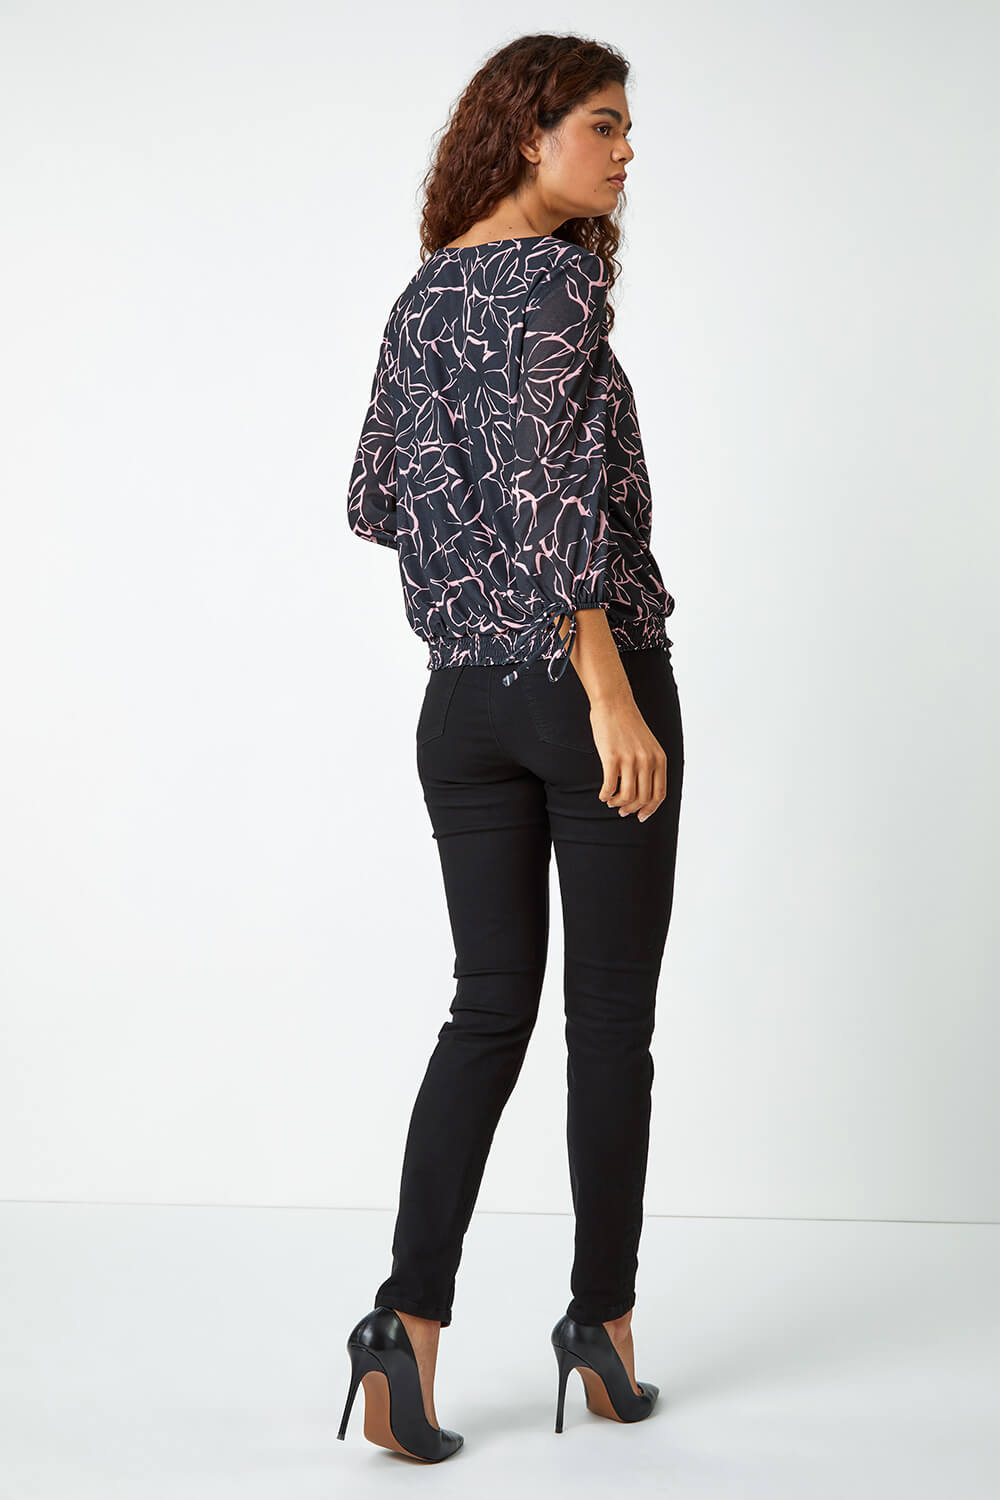 Light Pink Floral Print Blouson Stretch Top, Image 3 of 5